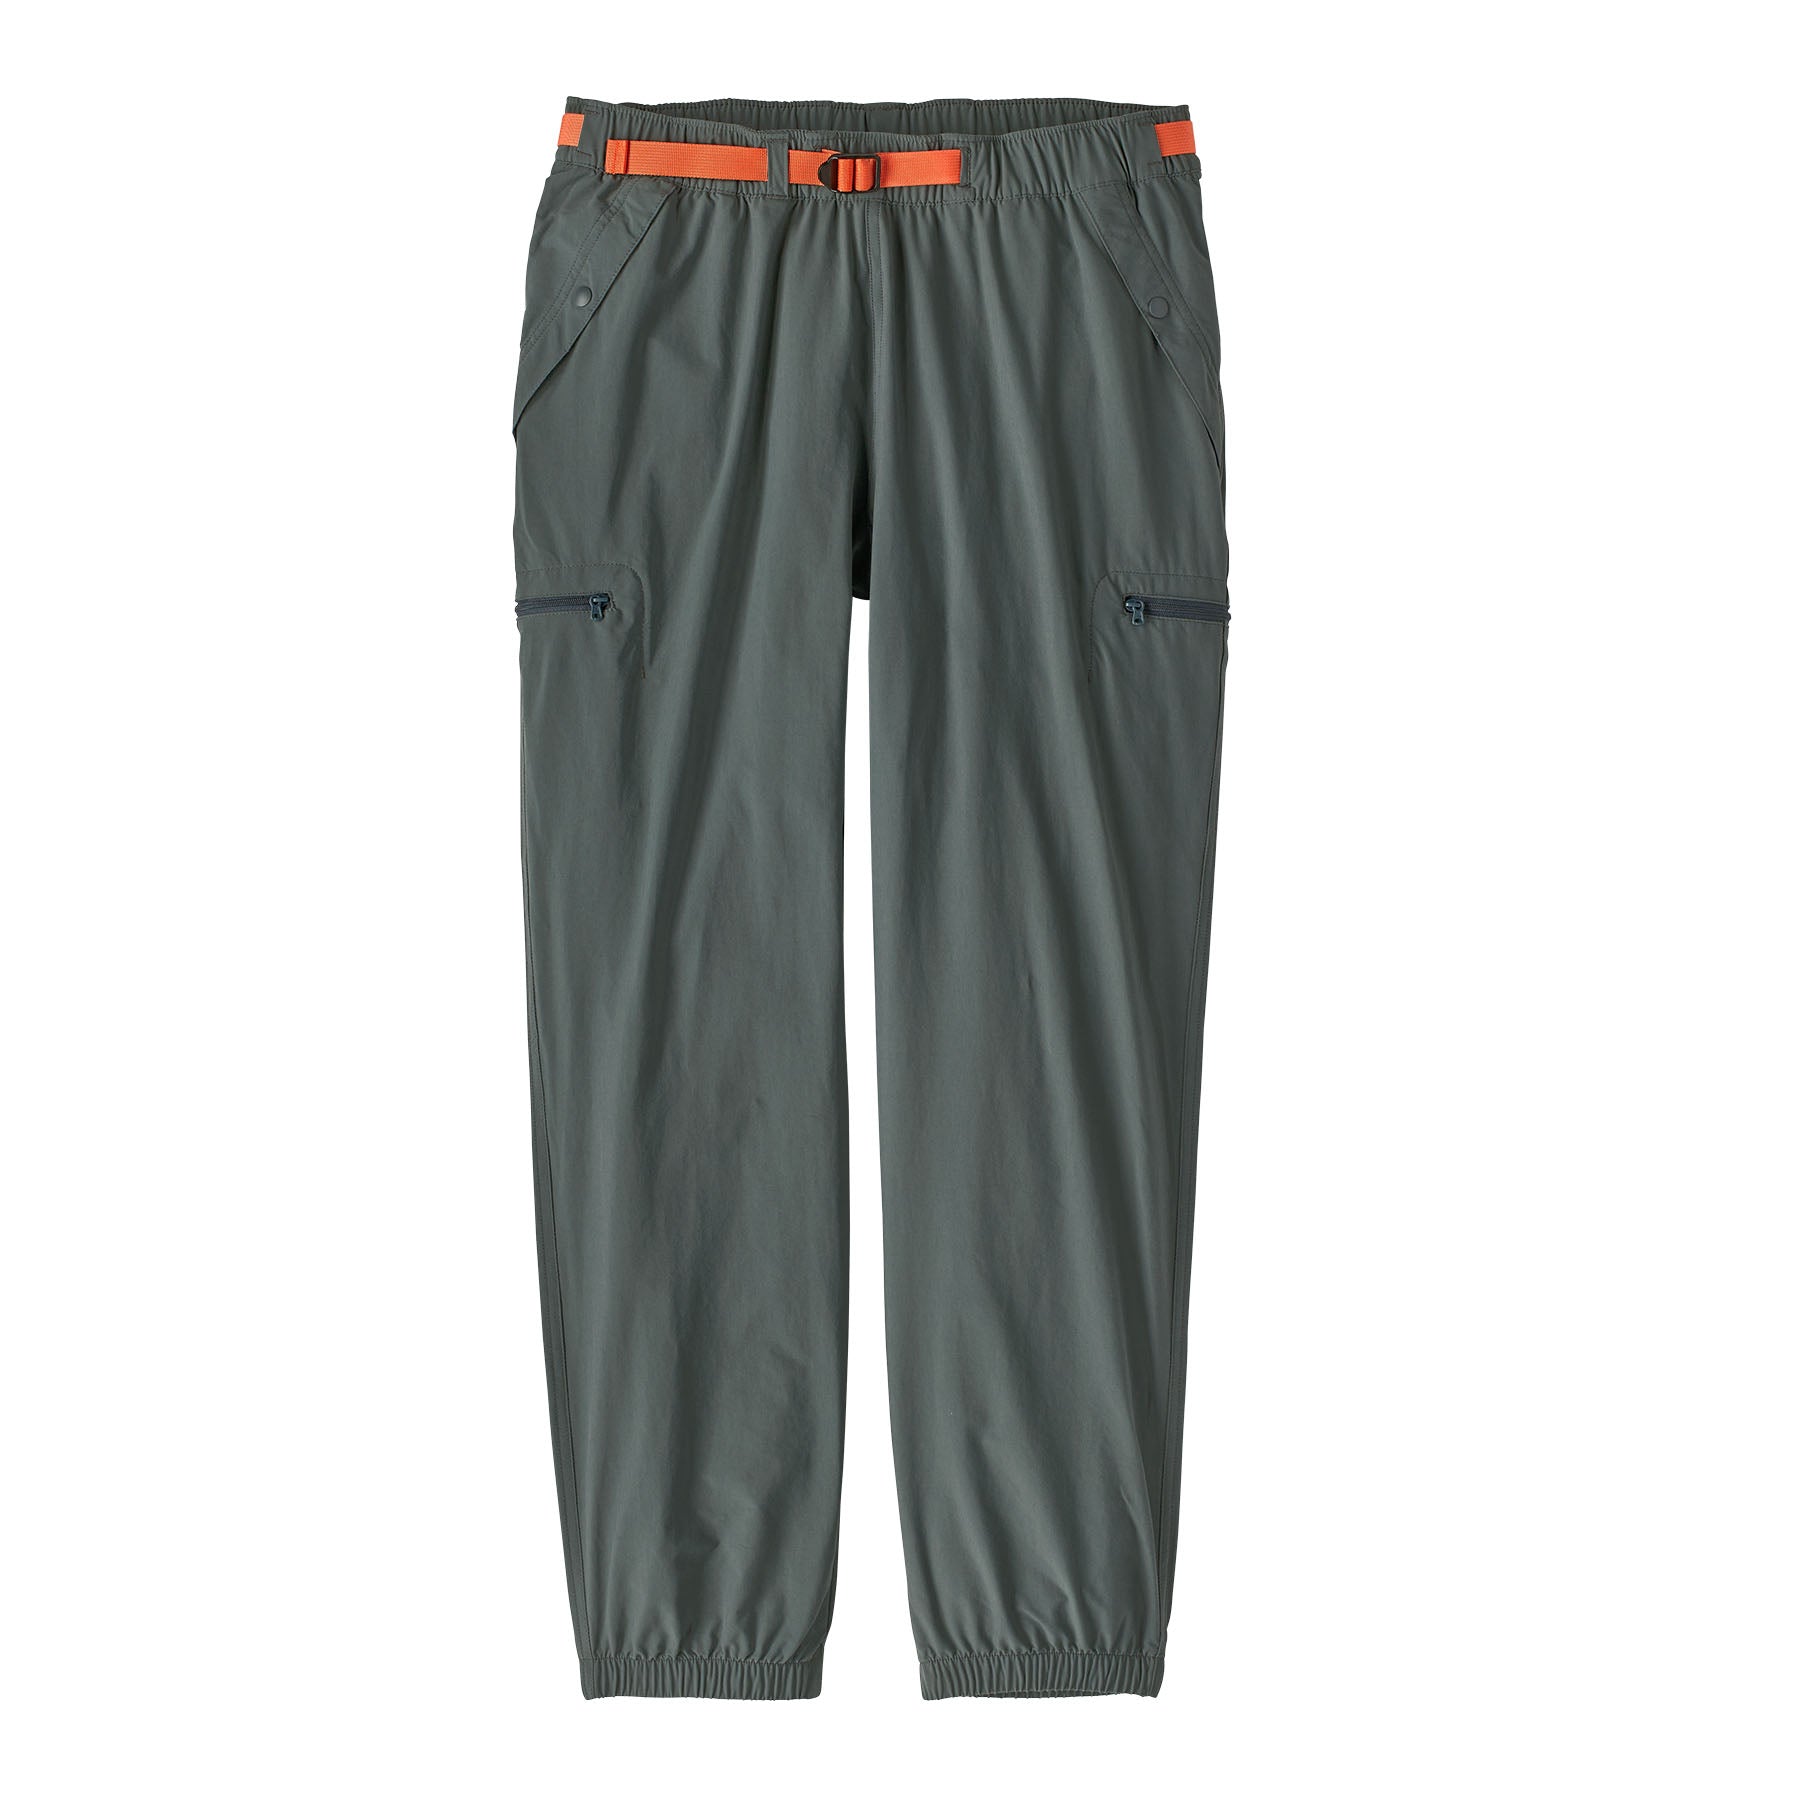 Patagonia M's Outdoor Everyday Pants - Fin & Fire Fly Shop